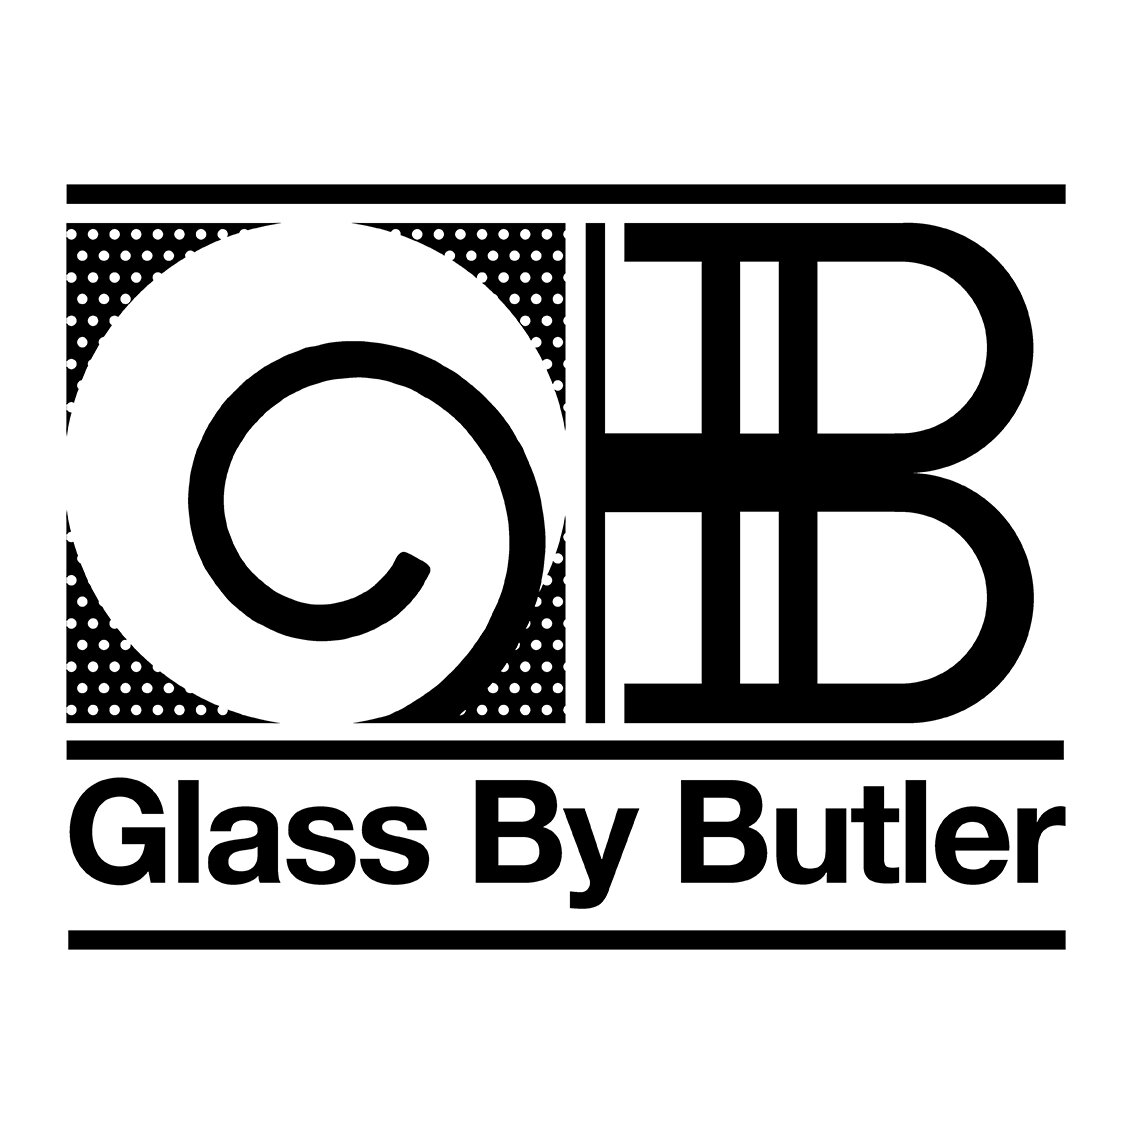 Glass By Butler